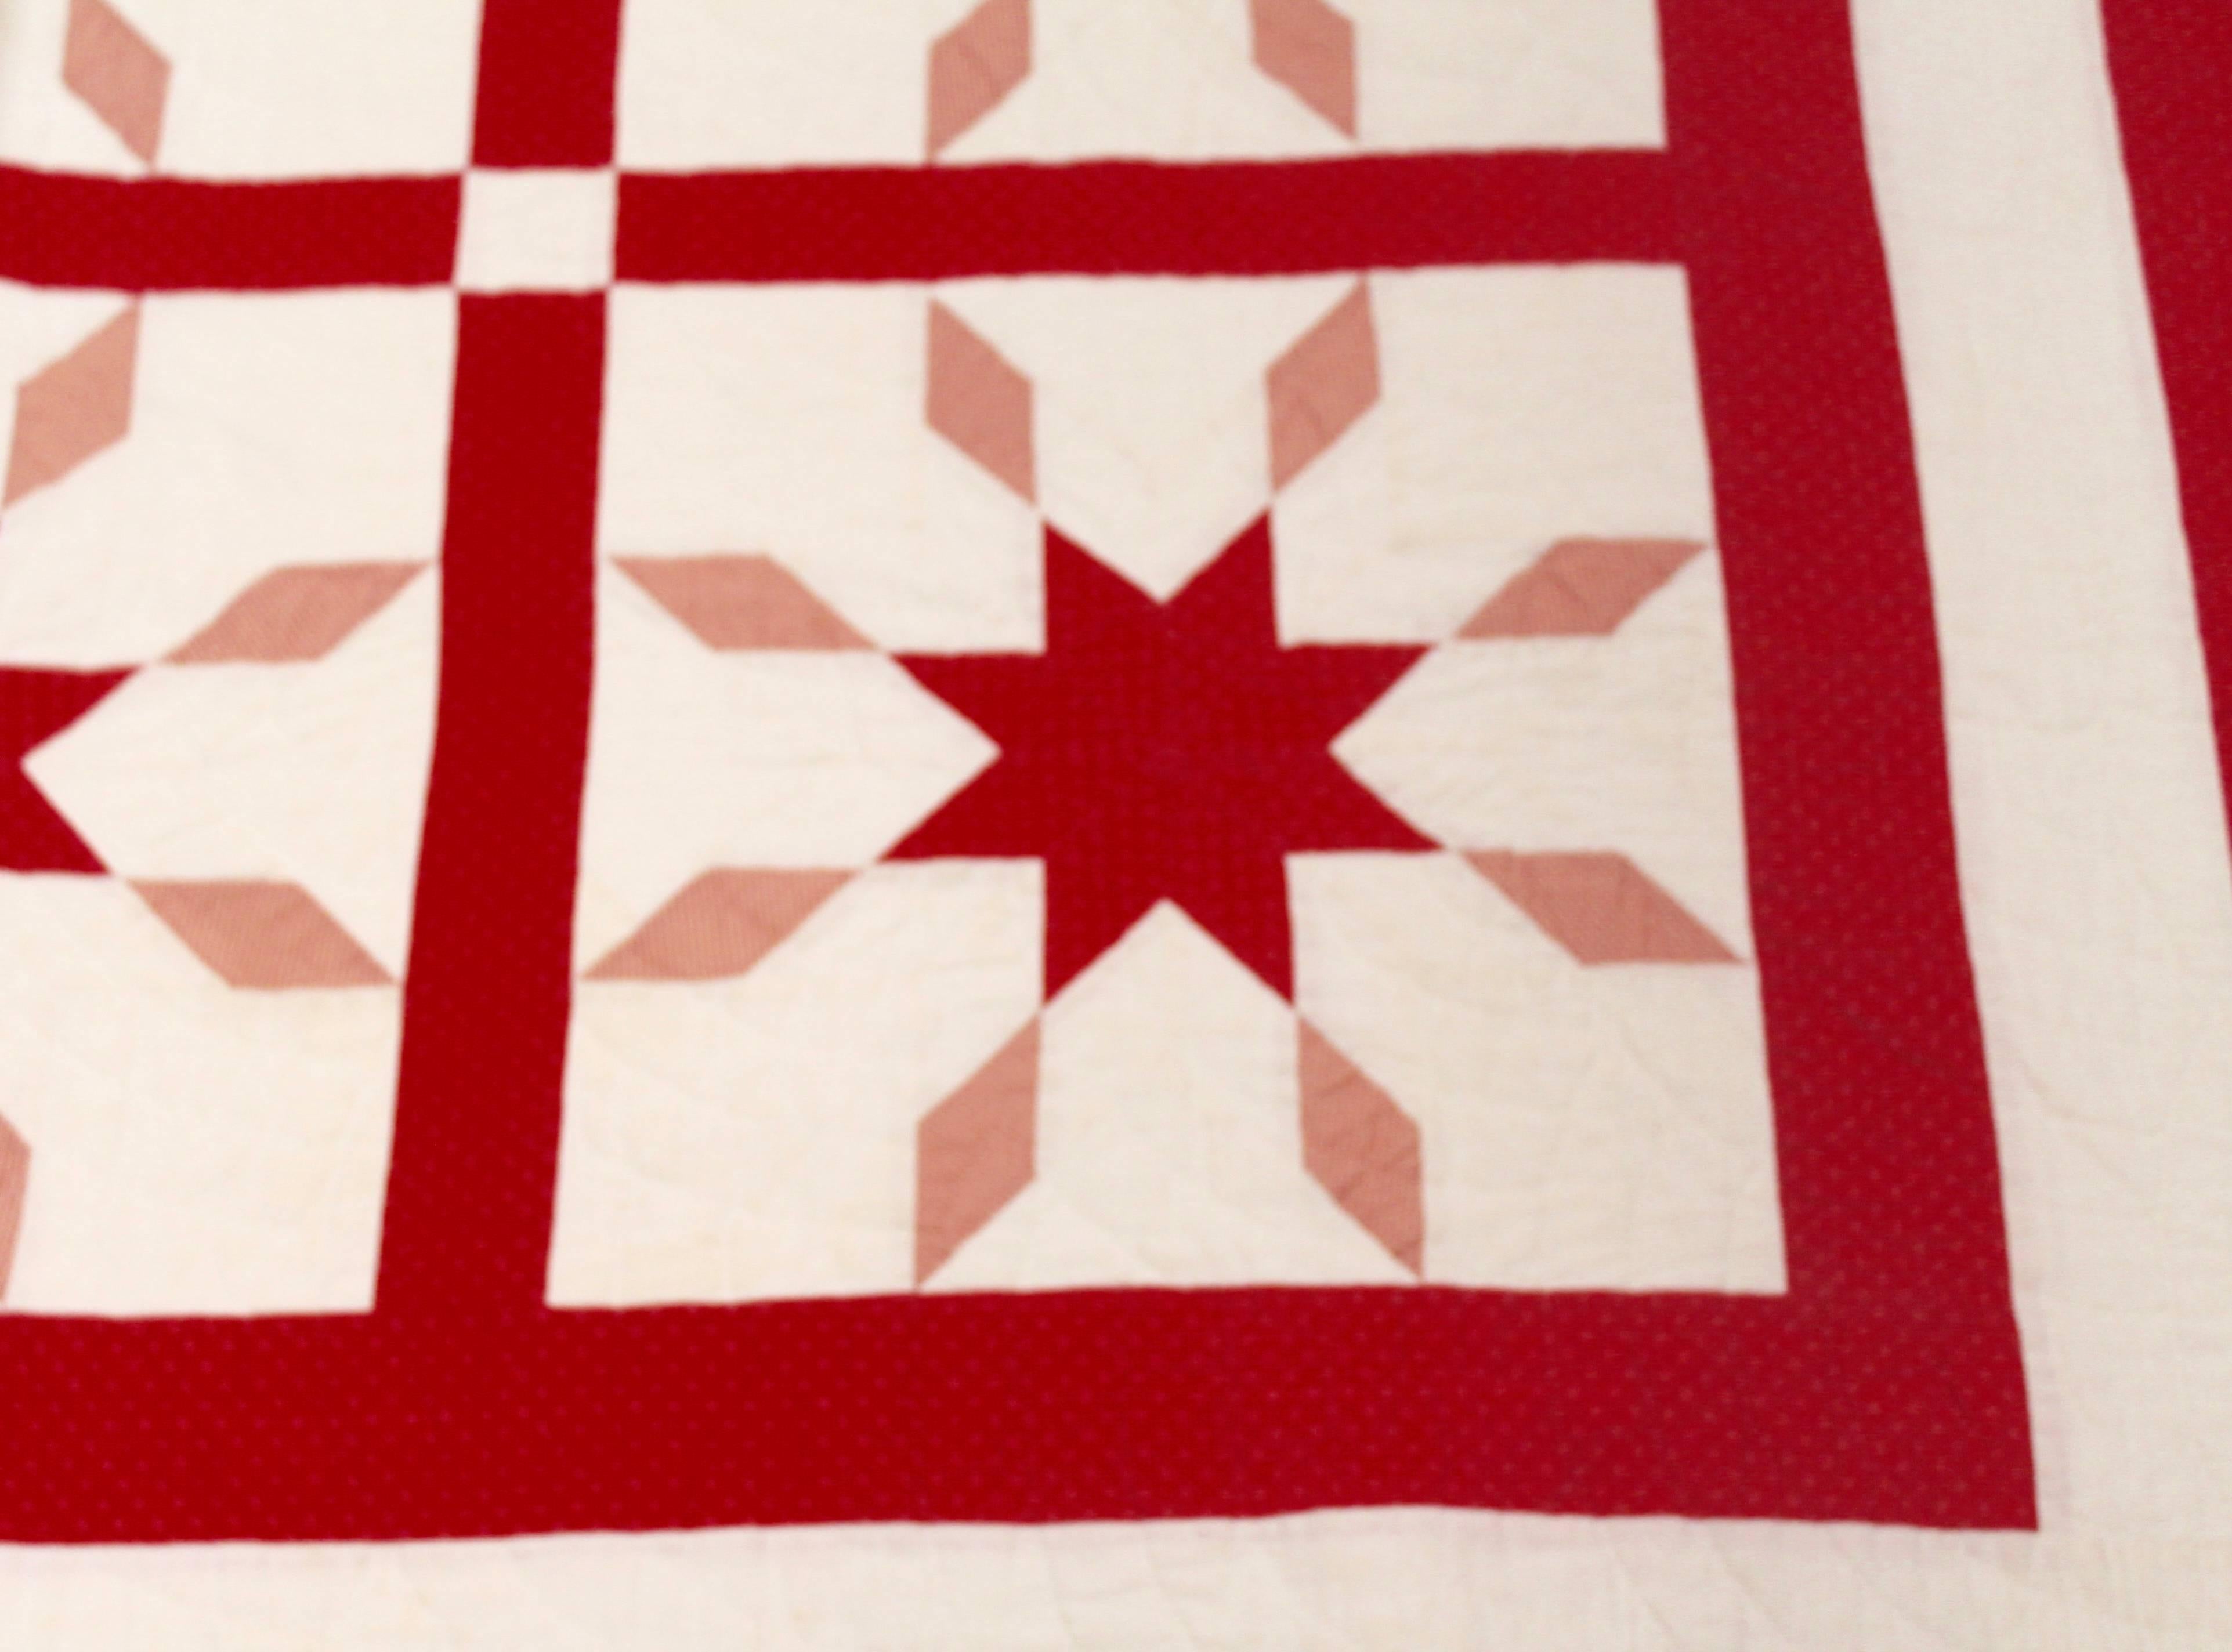 This hard to find large size broken star quilt is from Pennsylvania and is in fine condition. It has been professionally laundered and is signed by the maker. Her name is Pauline Sellers.